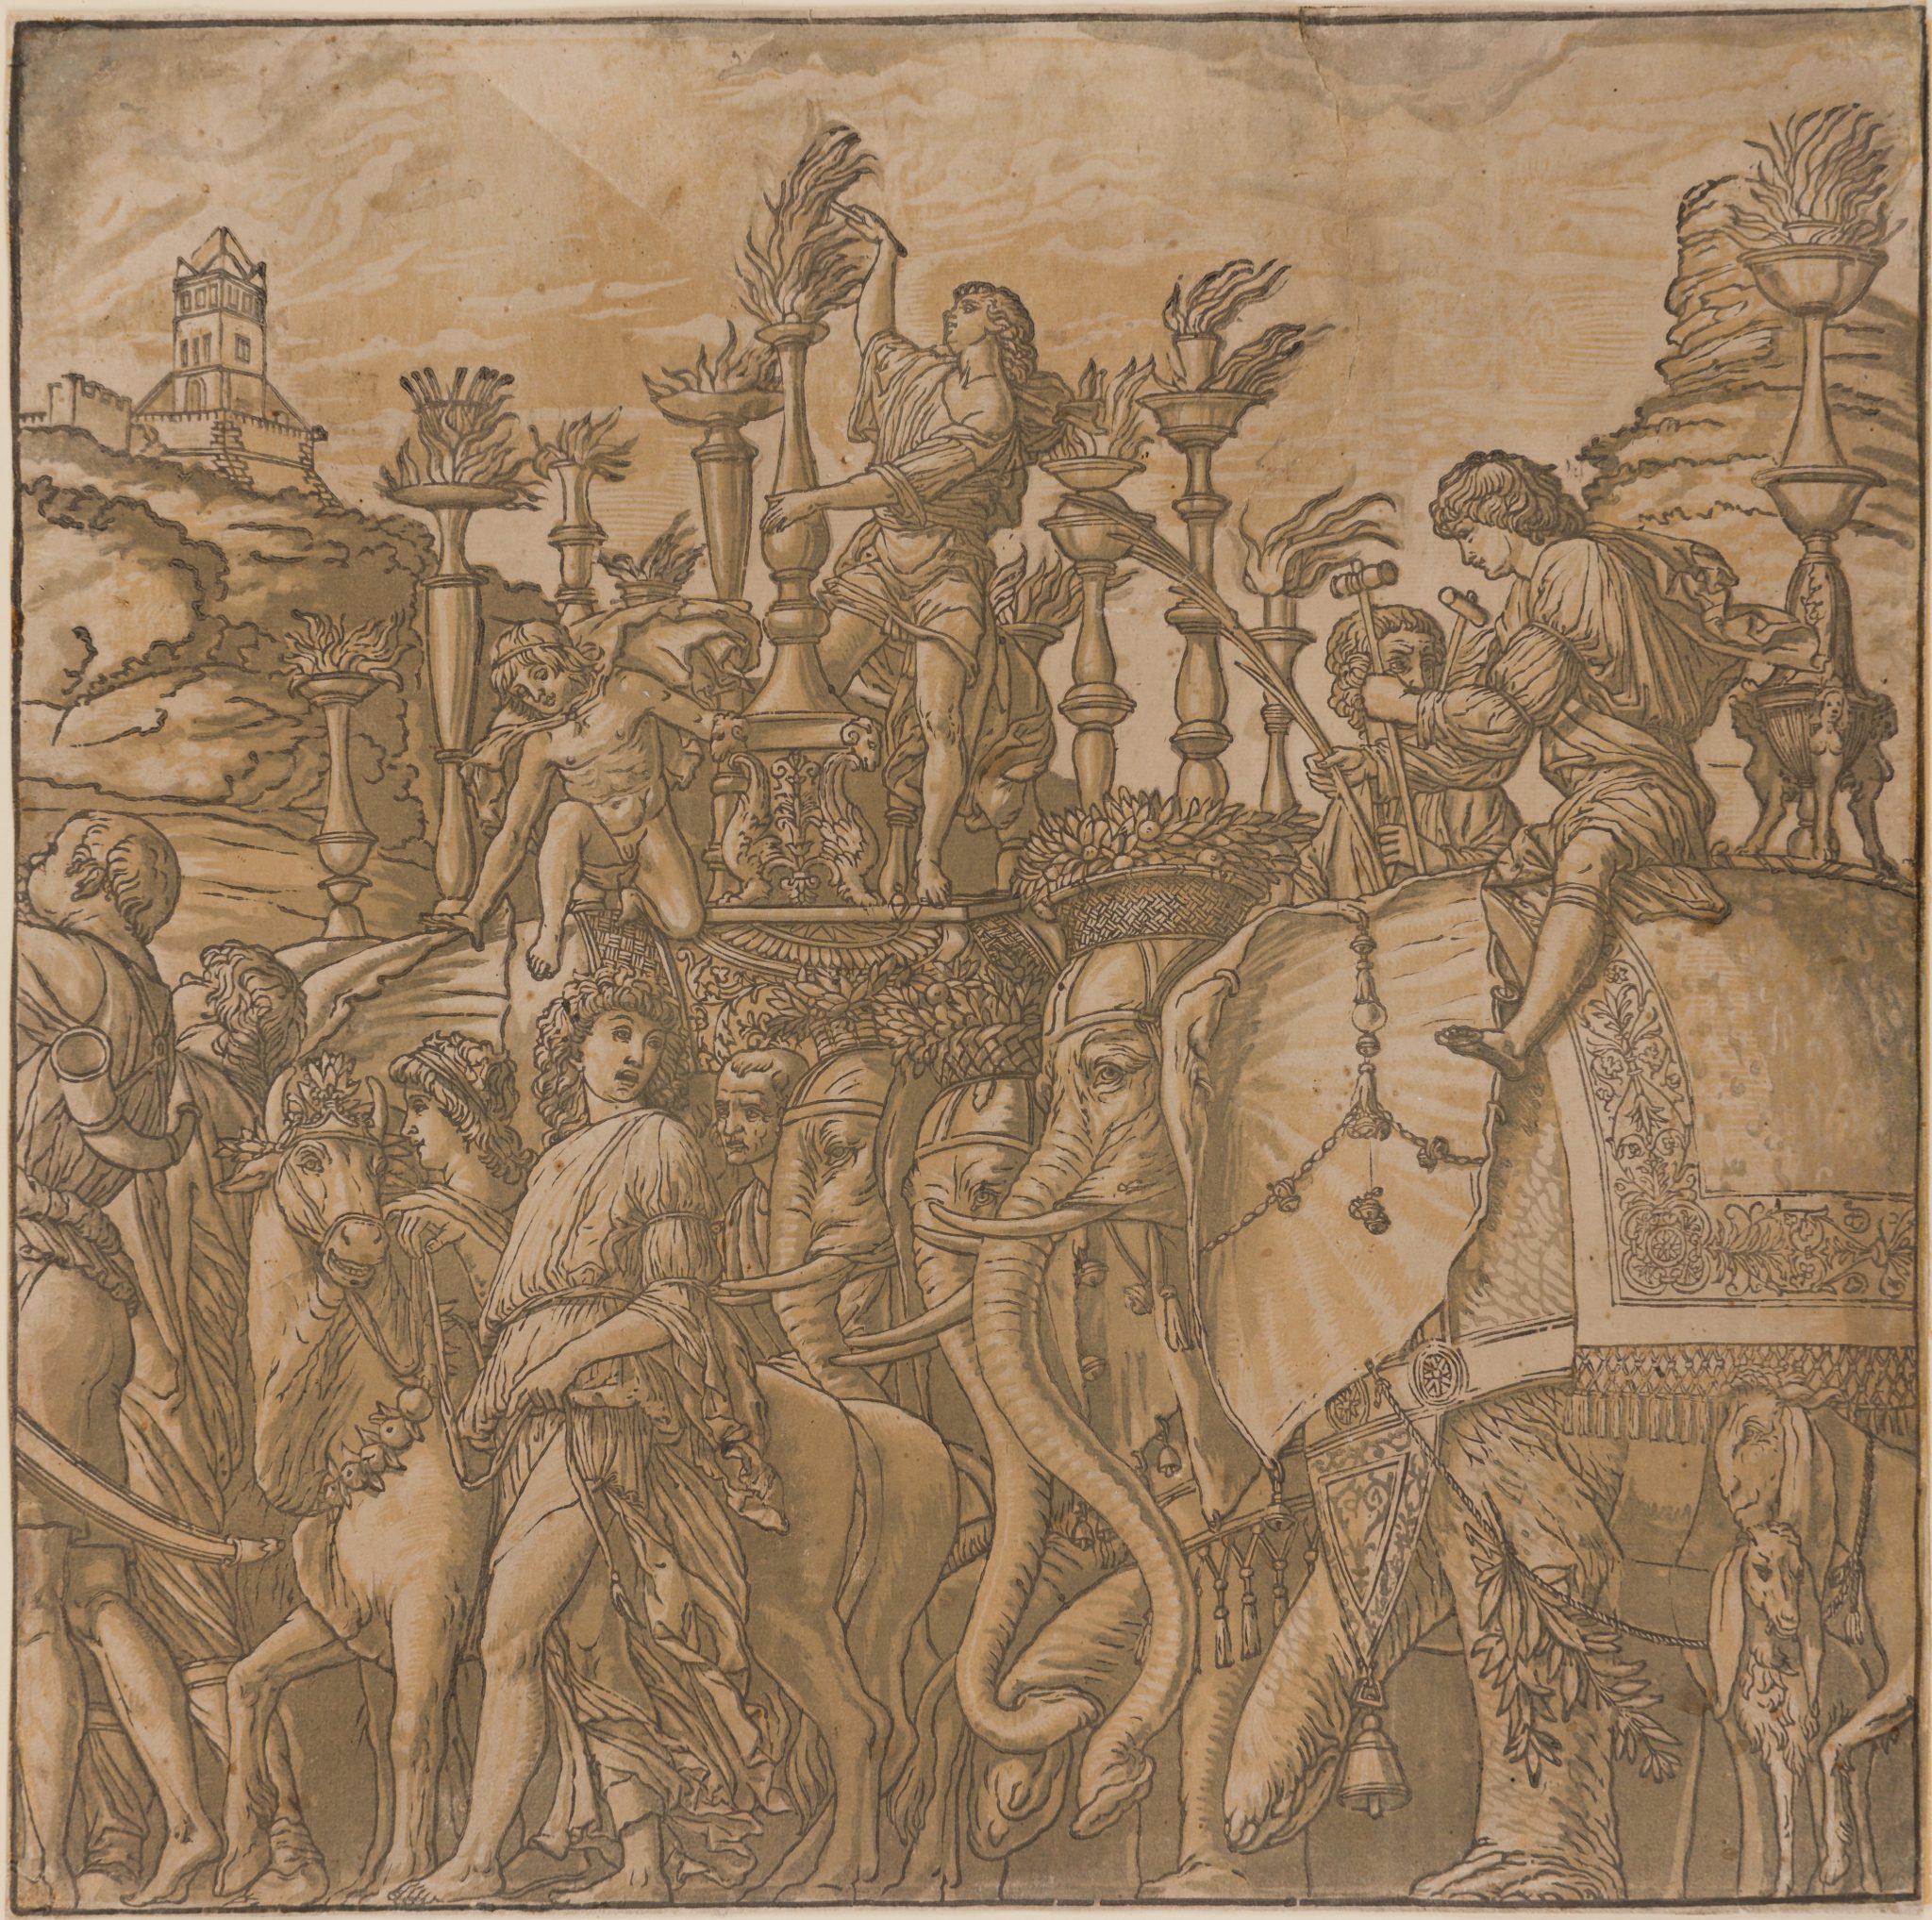 Woodcut featuring several figures holding torches, marching longside animals such as elephants and horses.